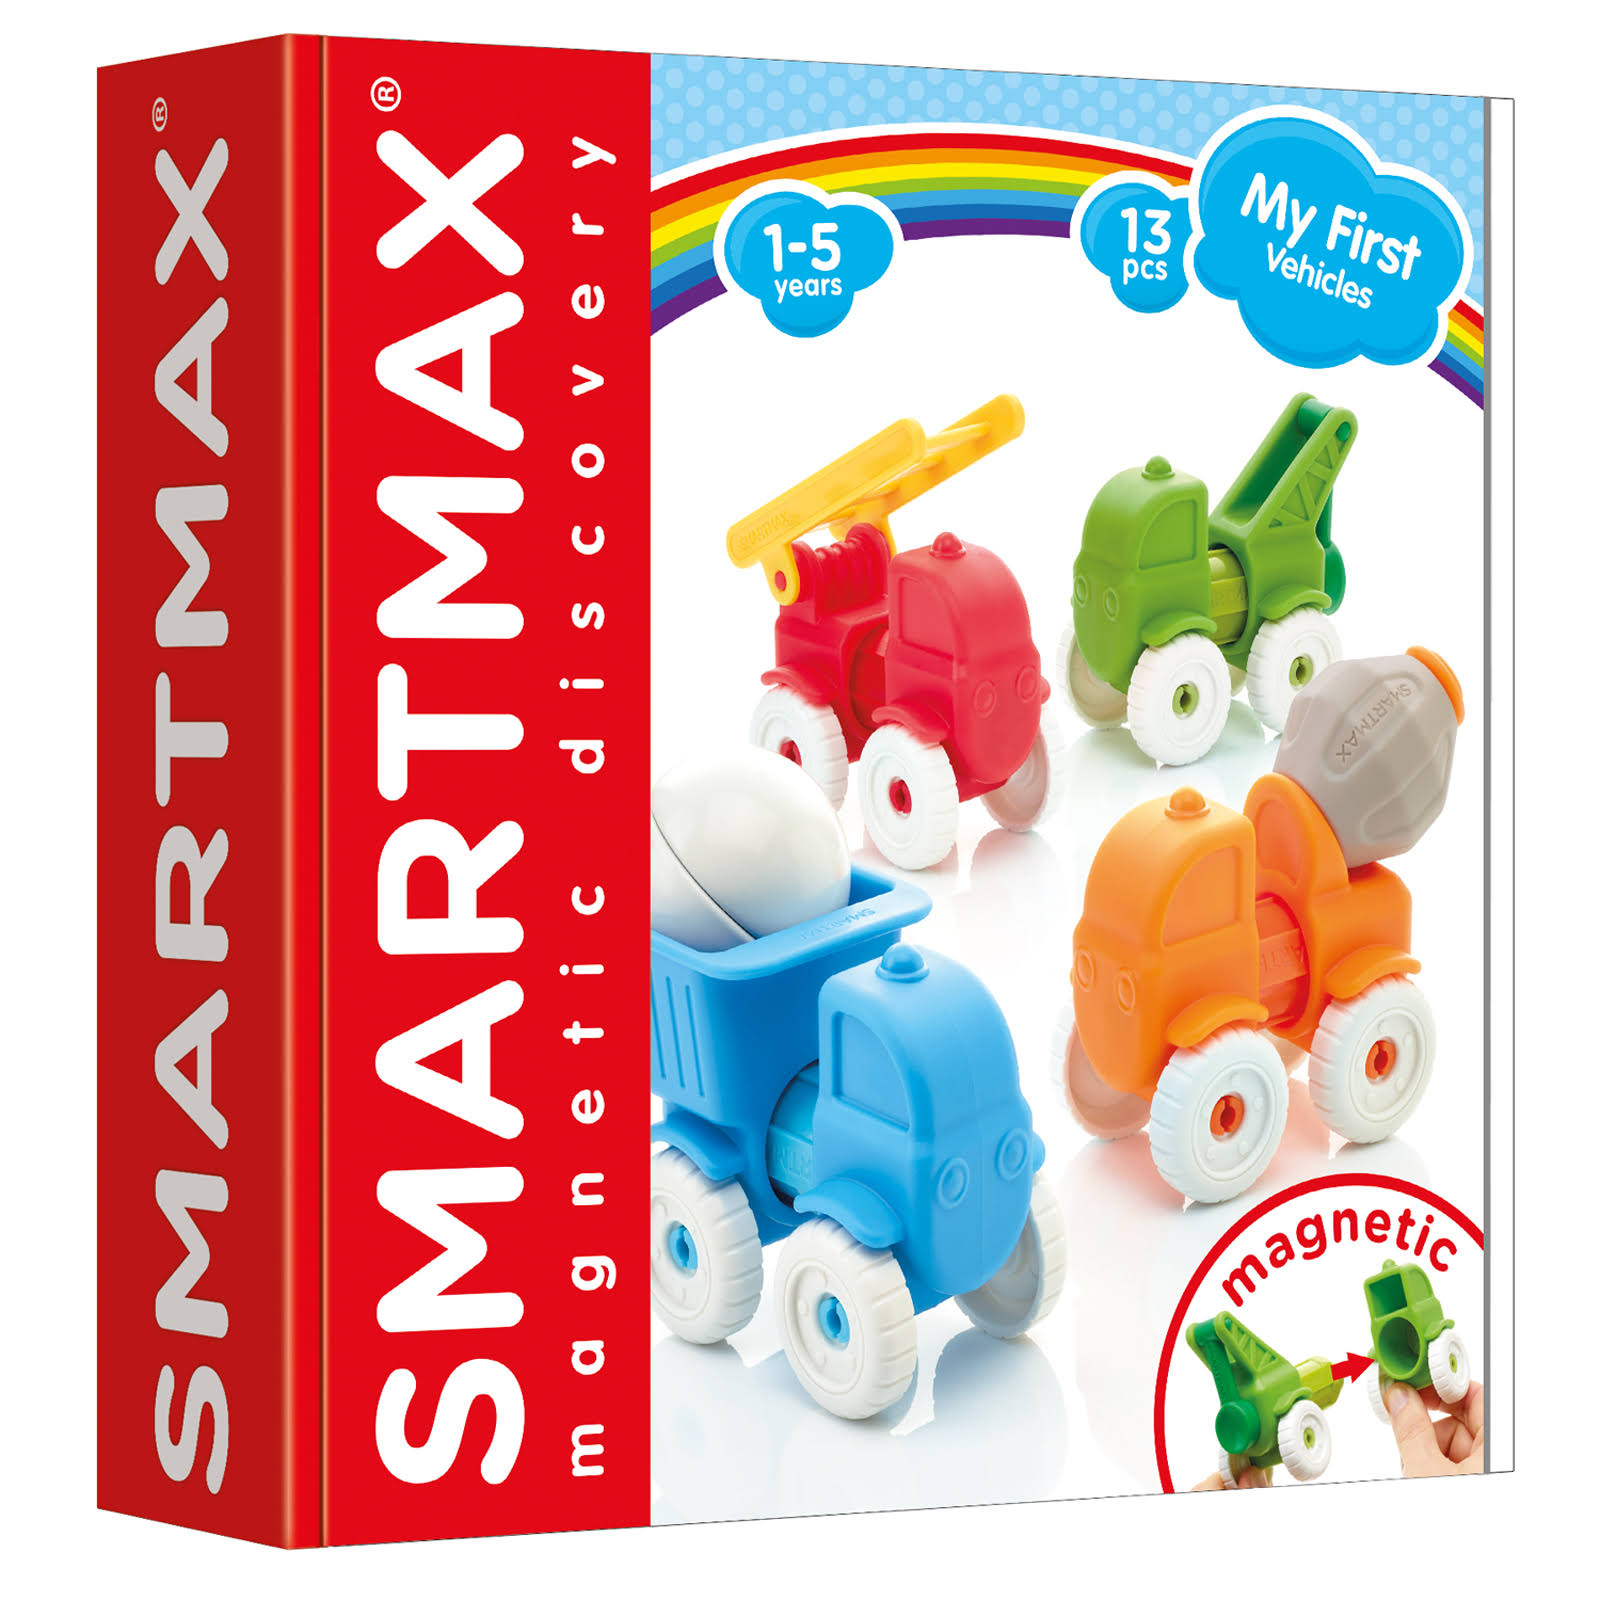 SmartMax My First Vehicles Magnetic Discovery Stem Play Set For Ages 1